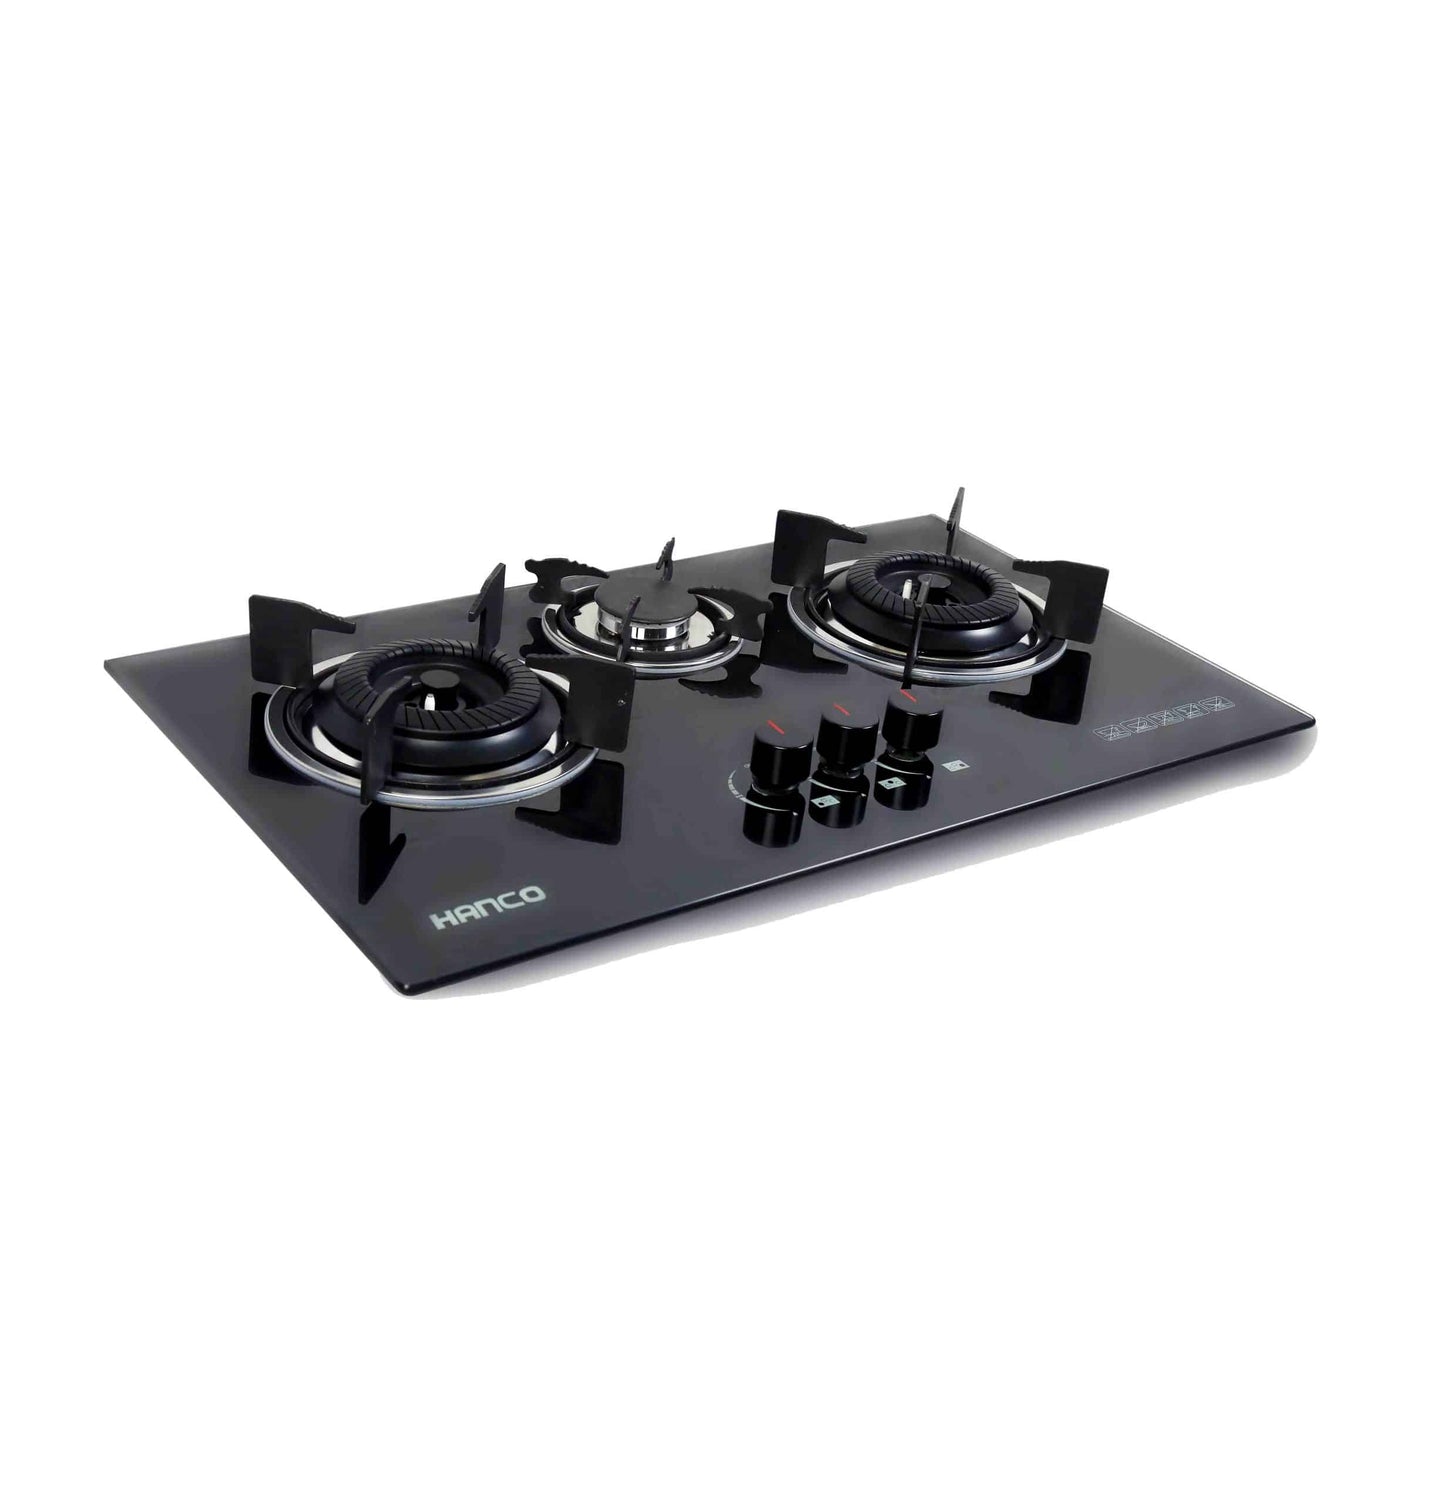 Hanco Built in Hob (Model 401) Brass Burner Tempered Glass Auto Ignition Stove 1 Year Brand Warranty